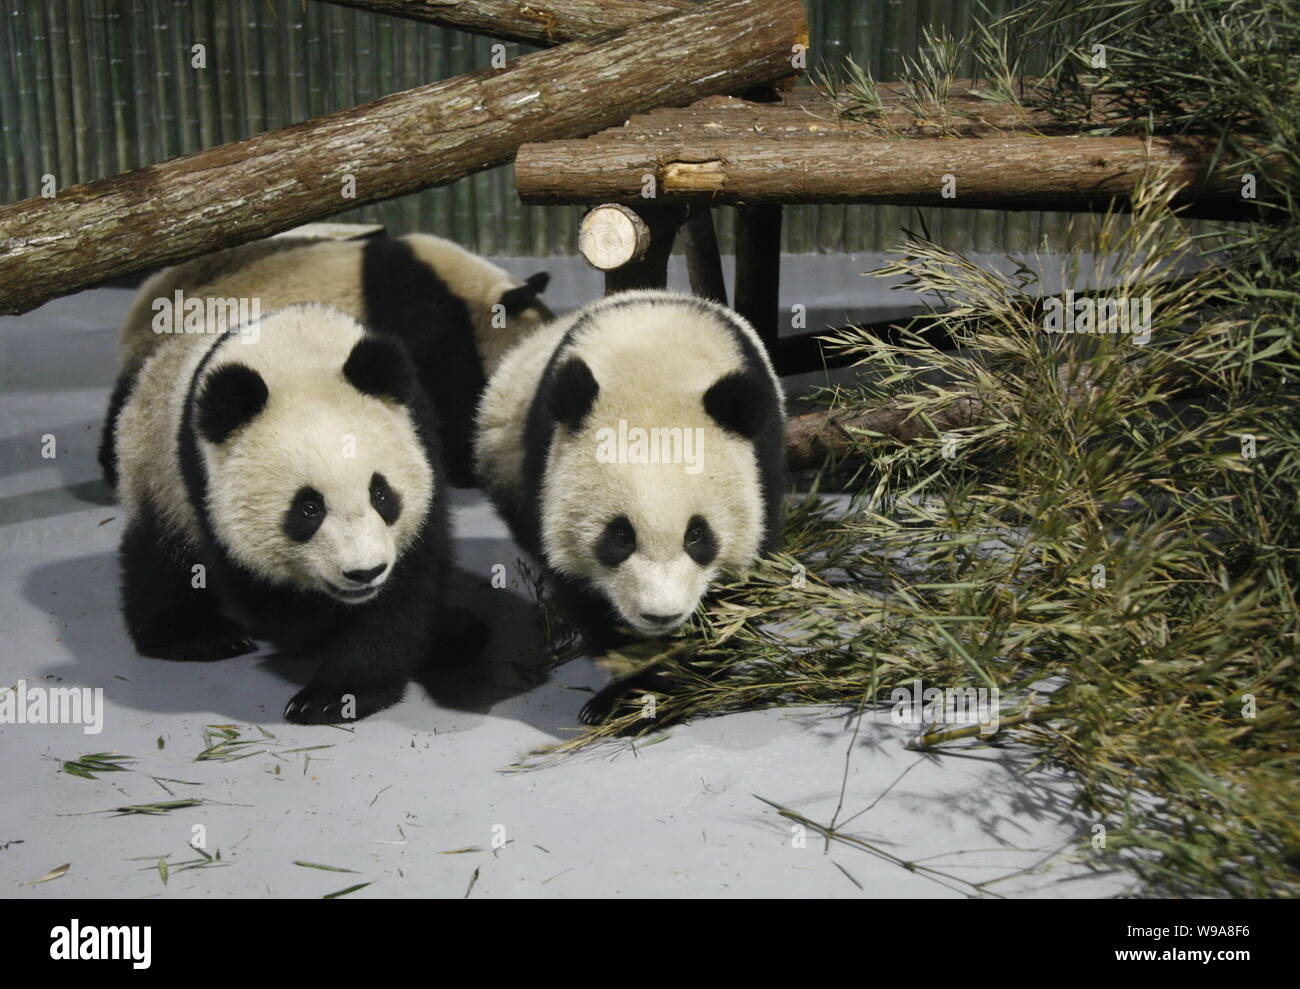 Giant pandas from Bifengxia Base of the Wolong Giant Panda Reserve Center have fun at the Shanghai Zoo in Shanghai, China, Tuesday, January 5, 2010. Stock Photo